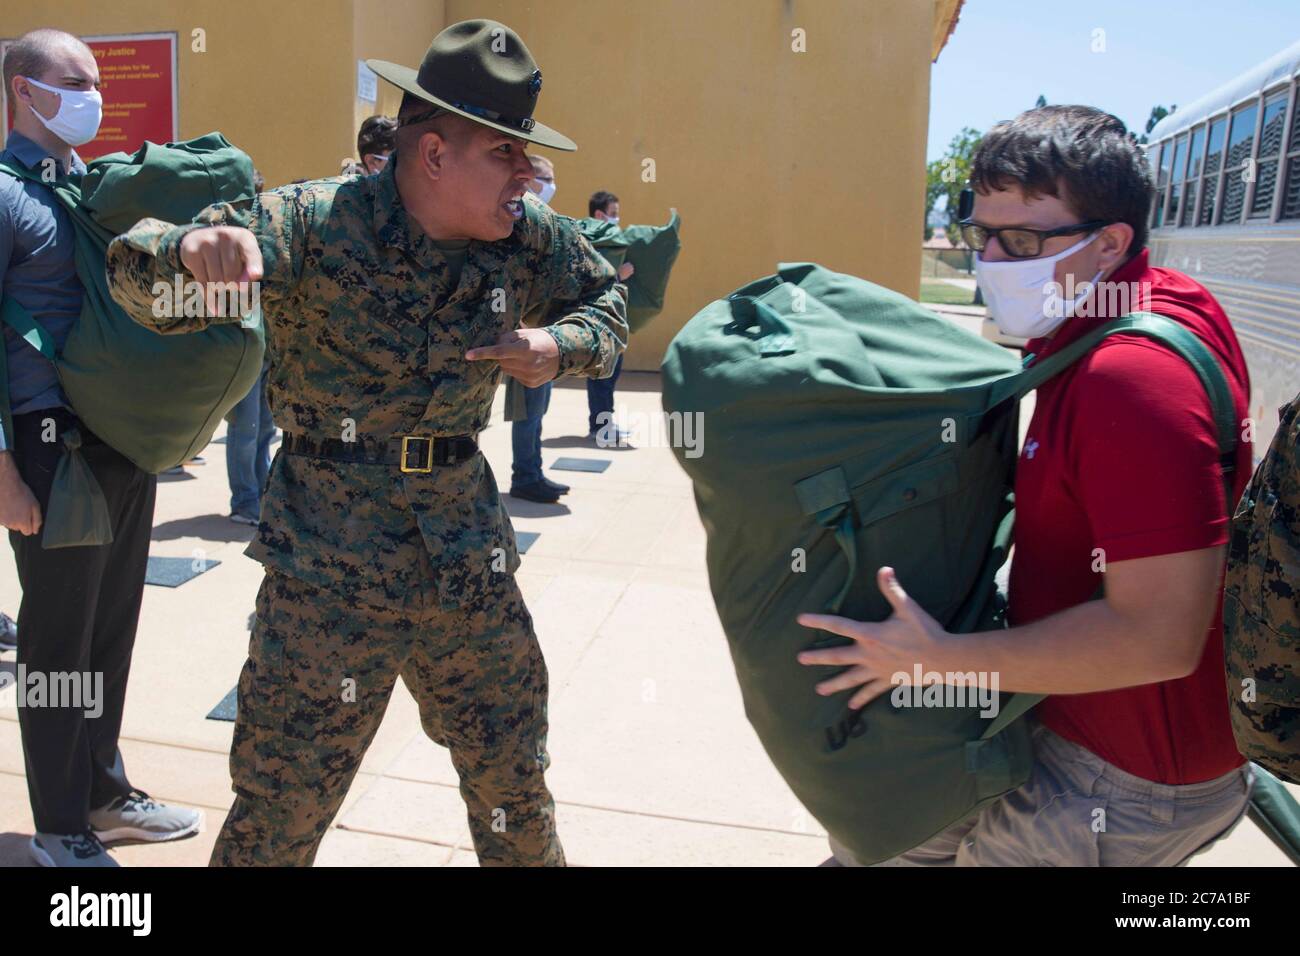 U.S. Marine SSgt. Ricardo Lomeli, a senior drill instructor, welcomes new recruits with Charlie Company, 1st Recruit Training Battalion, during receiving at Marine Corps Recruit Depot July 7, 2020 in San Diego, California. Stock Photo